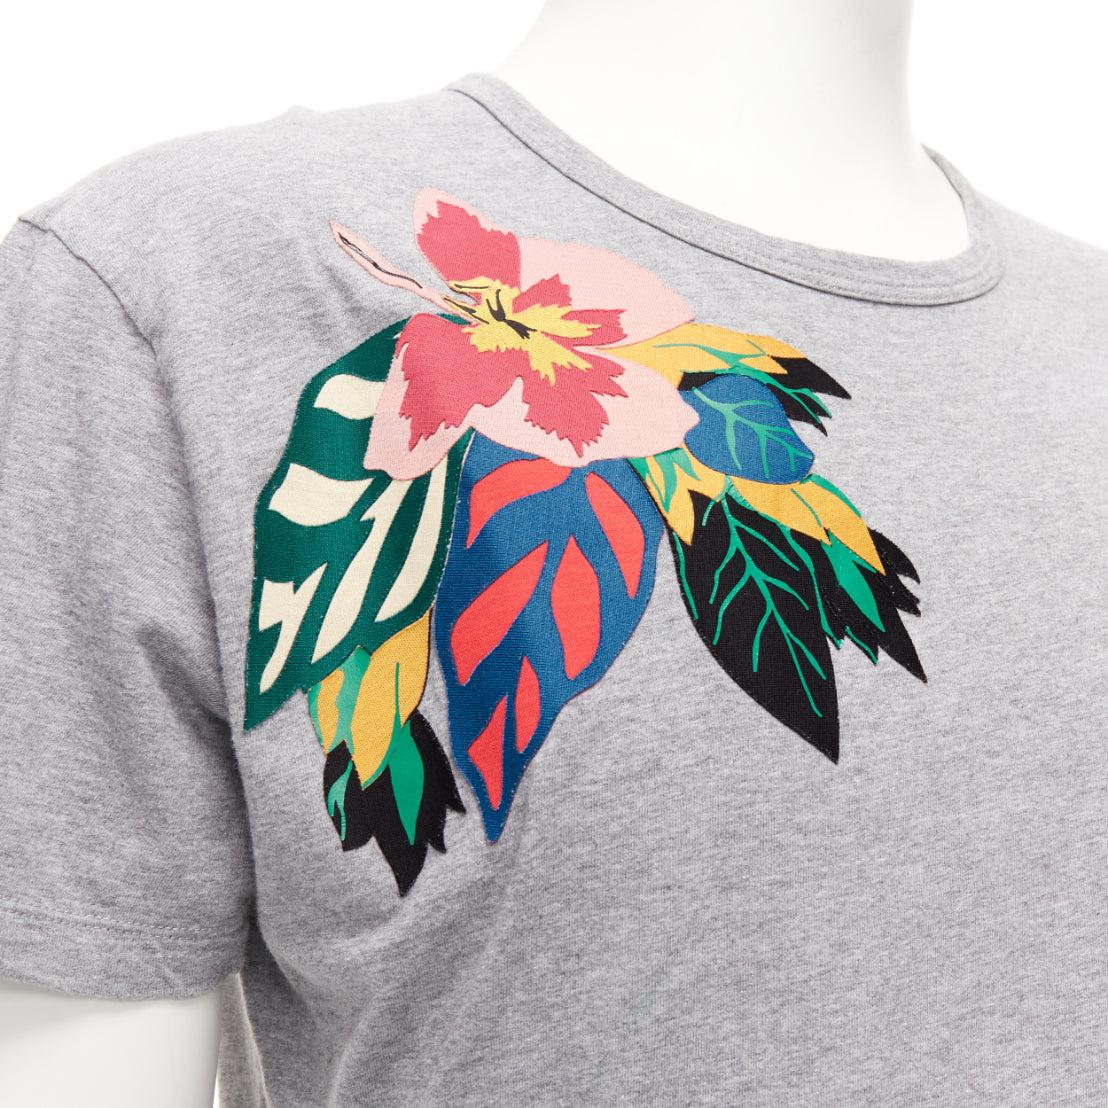 VALENTINO grey cotton multicolour Cuban Flower patch crew neck tshirt M
Reference: JSLE/A00126
Brand: Valentino
Designer: Pier Paolo Piccioli
Collection: Cuban Flower
Material: Cotton
Color: Grey, Multicolour
Pattern: Floral
Closure: Pullover
Made